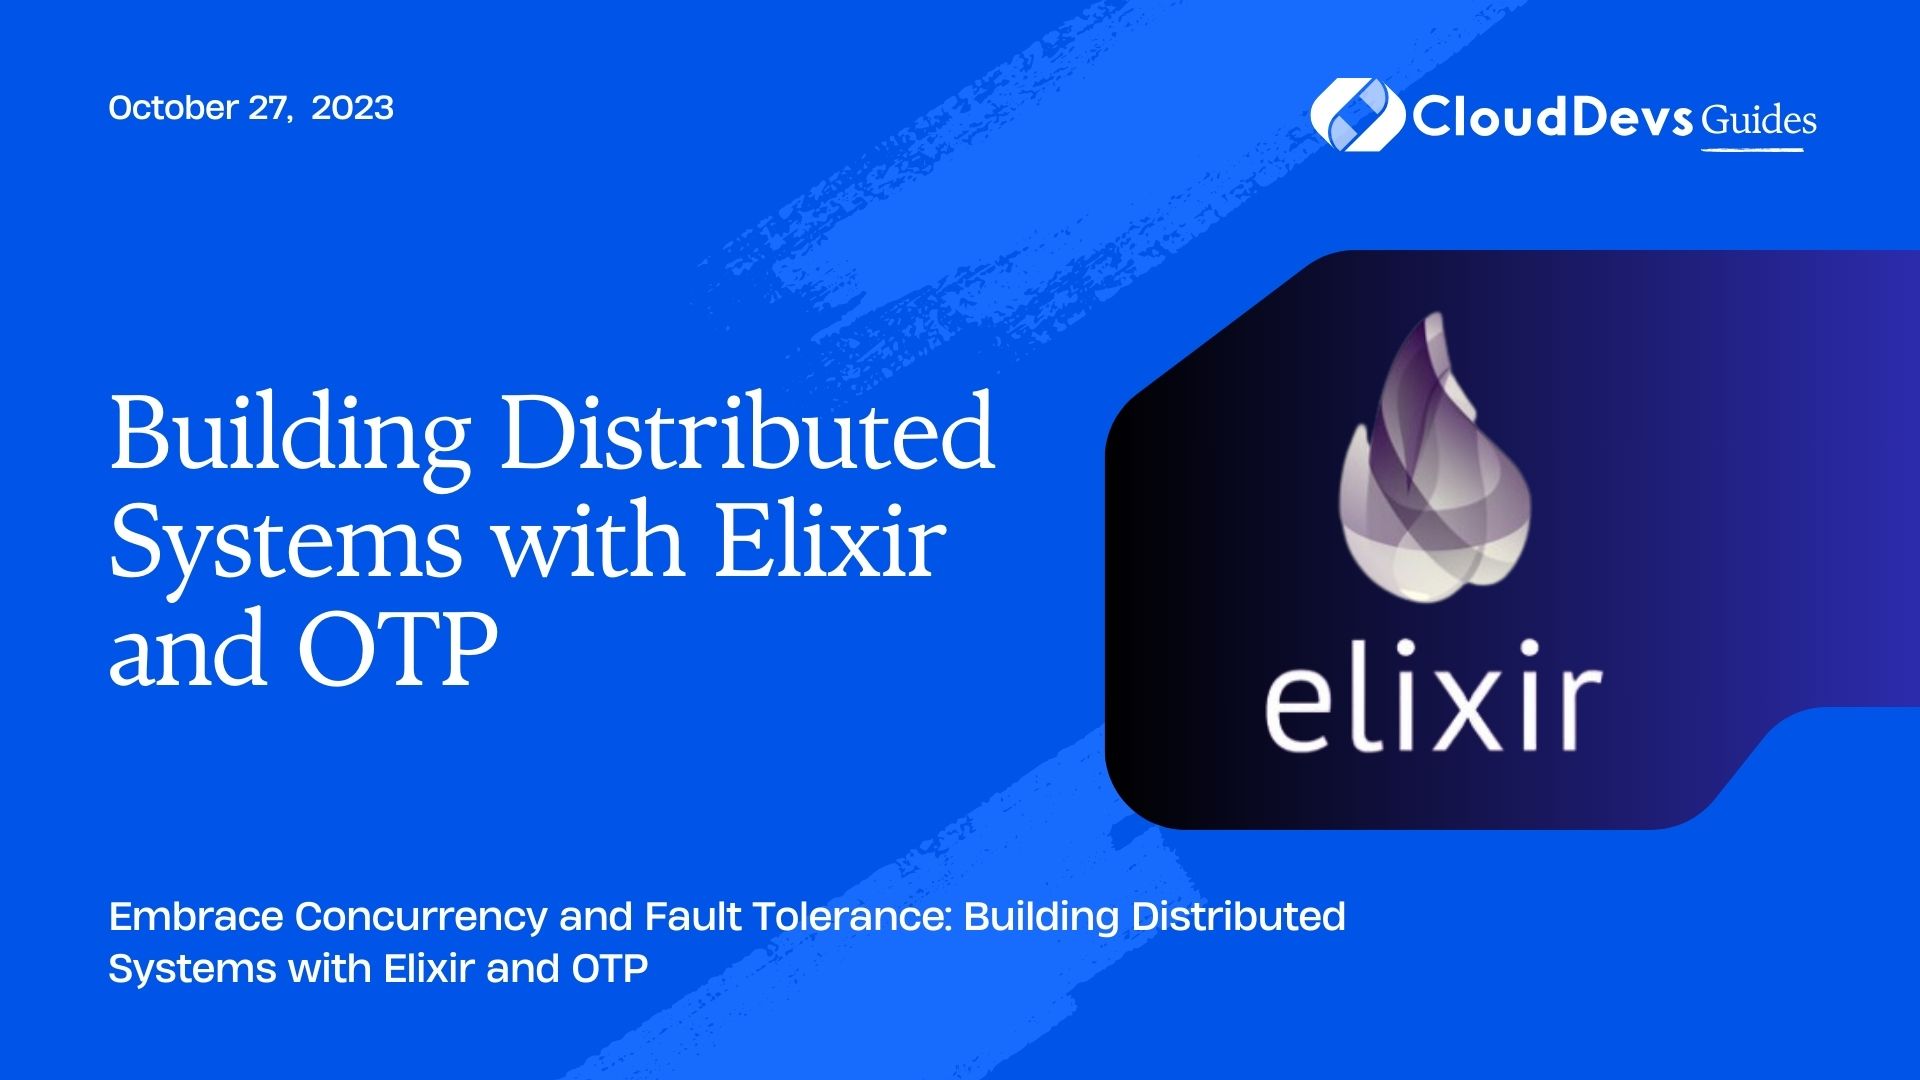 Building Distributed Systems with Elixir and OTP